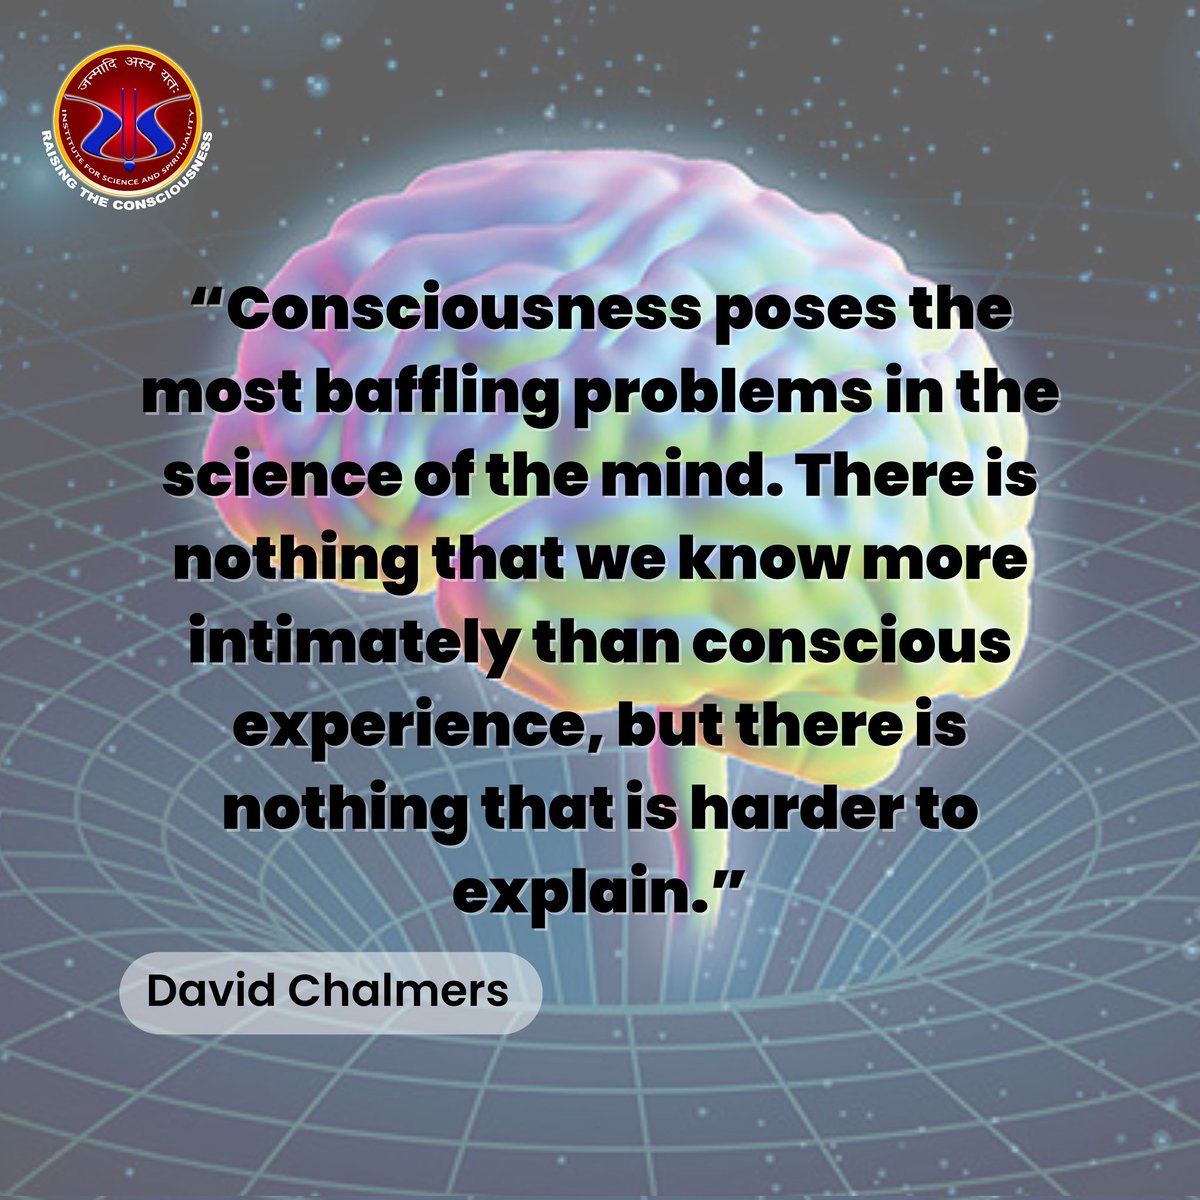 A Quote from DAVID CHALMERS, on the Science of Consciousness.
.
.
.
.
#Science #Consciousness #Scienceofconsciousness #scienceandreligion #discoveryourself #scientificcommunity #faith #selfconsciousness #ISS #instituteforscienceandspirituality